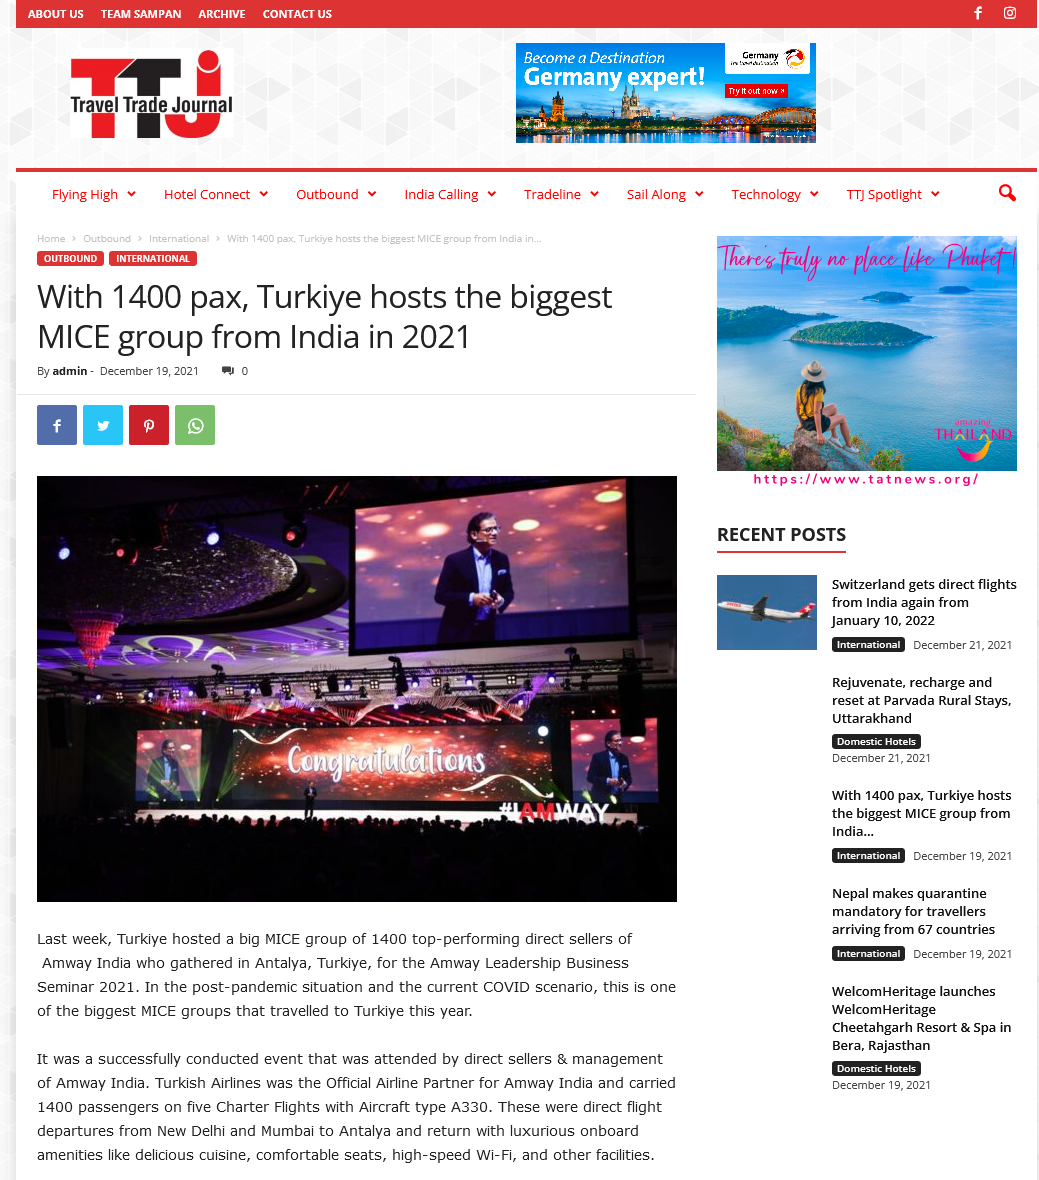 With 1400 pax, Turkiye hosts the biggest MICE group from India in 2021